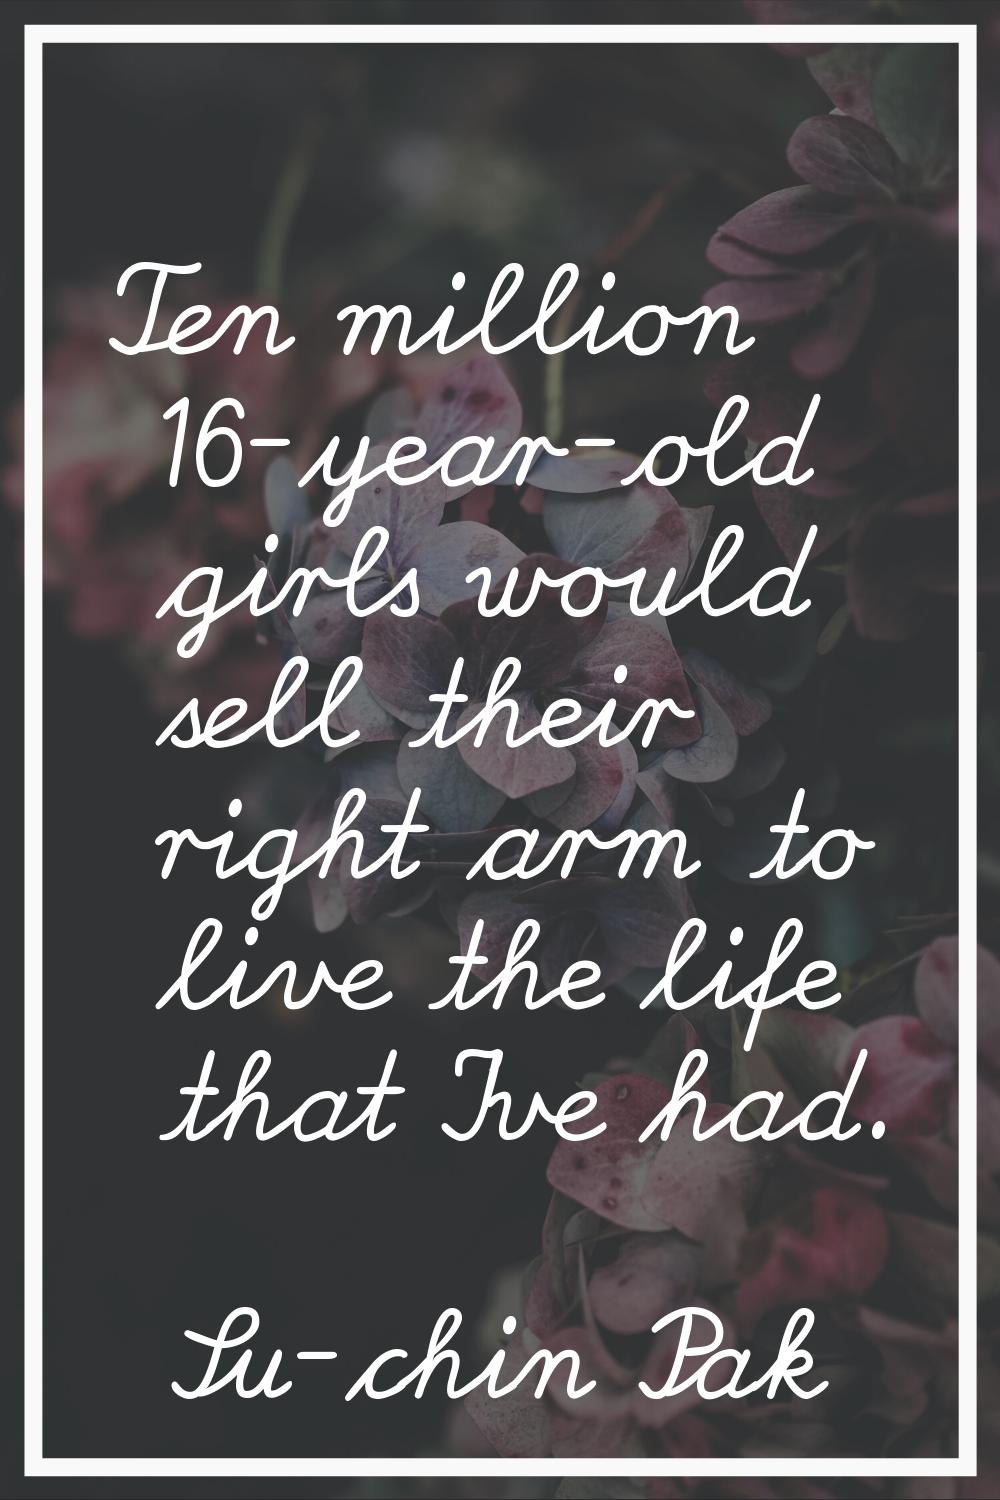 Ten million 16-year-old girls would sell their right arm to live the life that I've had.